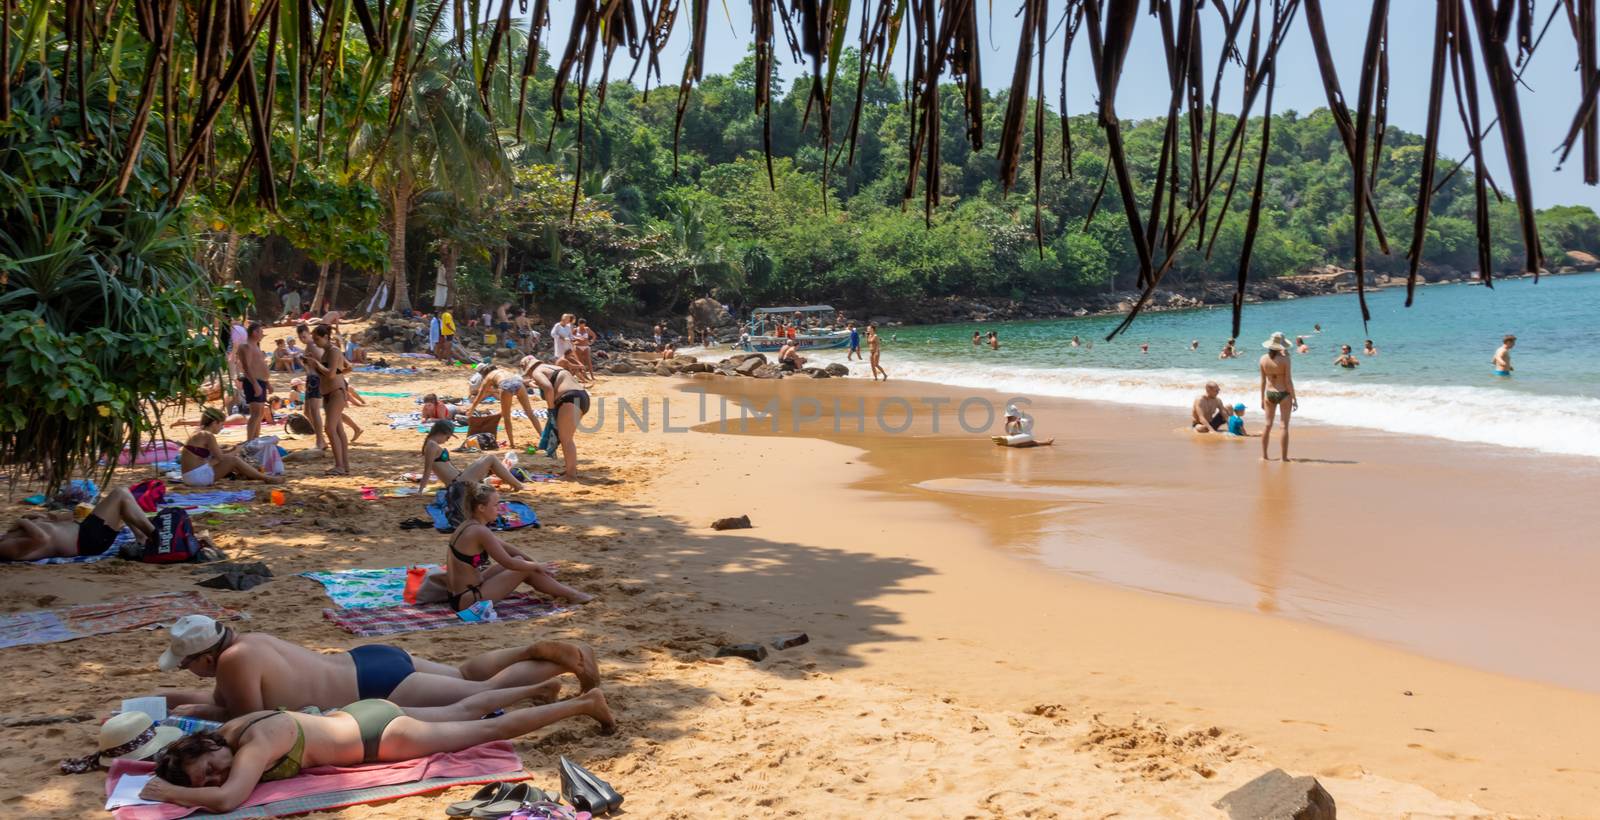 people sunbathing in Rumassala South Beach, is situated along with the Rumassala hill in Unawatuna. It is also known as Jungle Beach